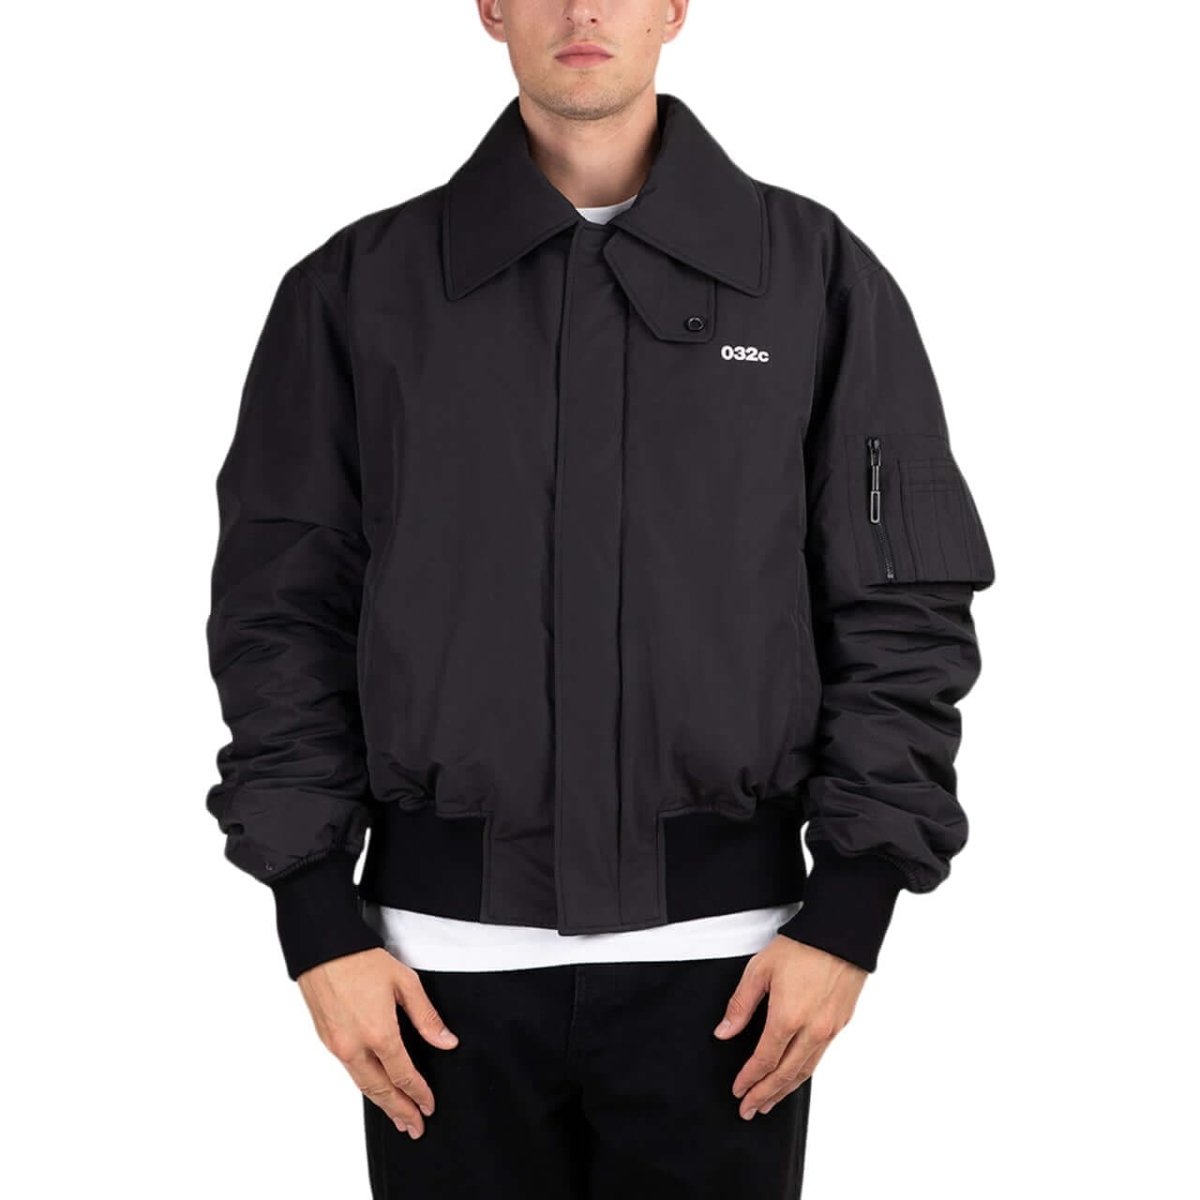 Image of 032c "Guilty" Classic Bomber Jacket (Black)